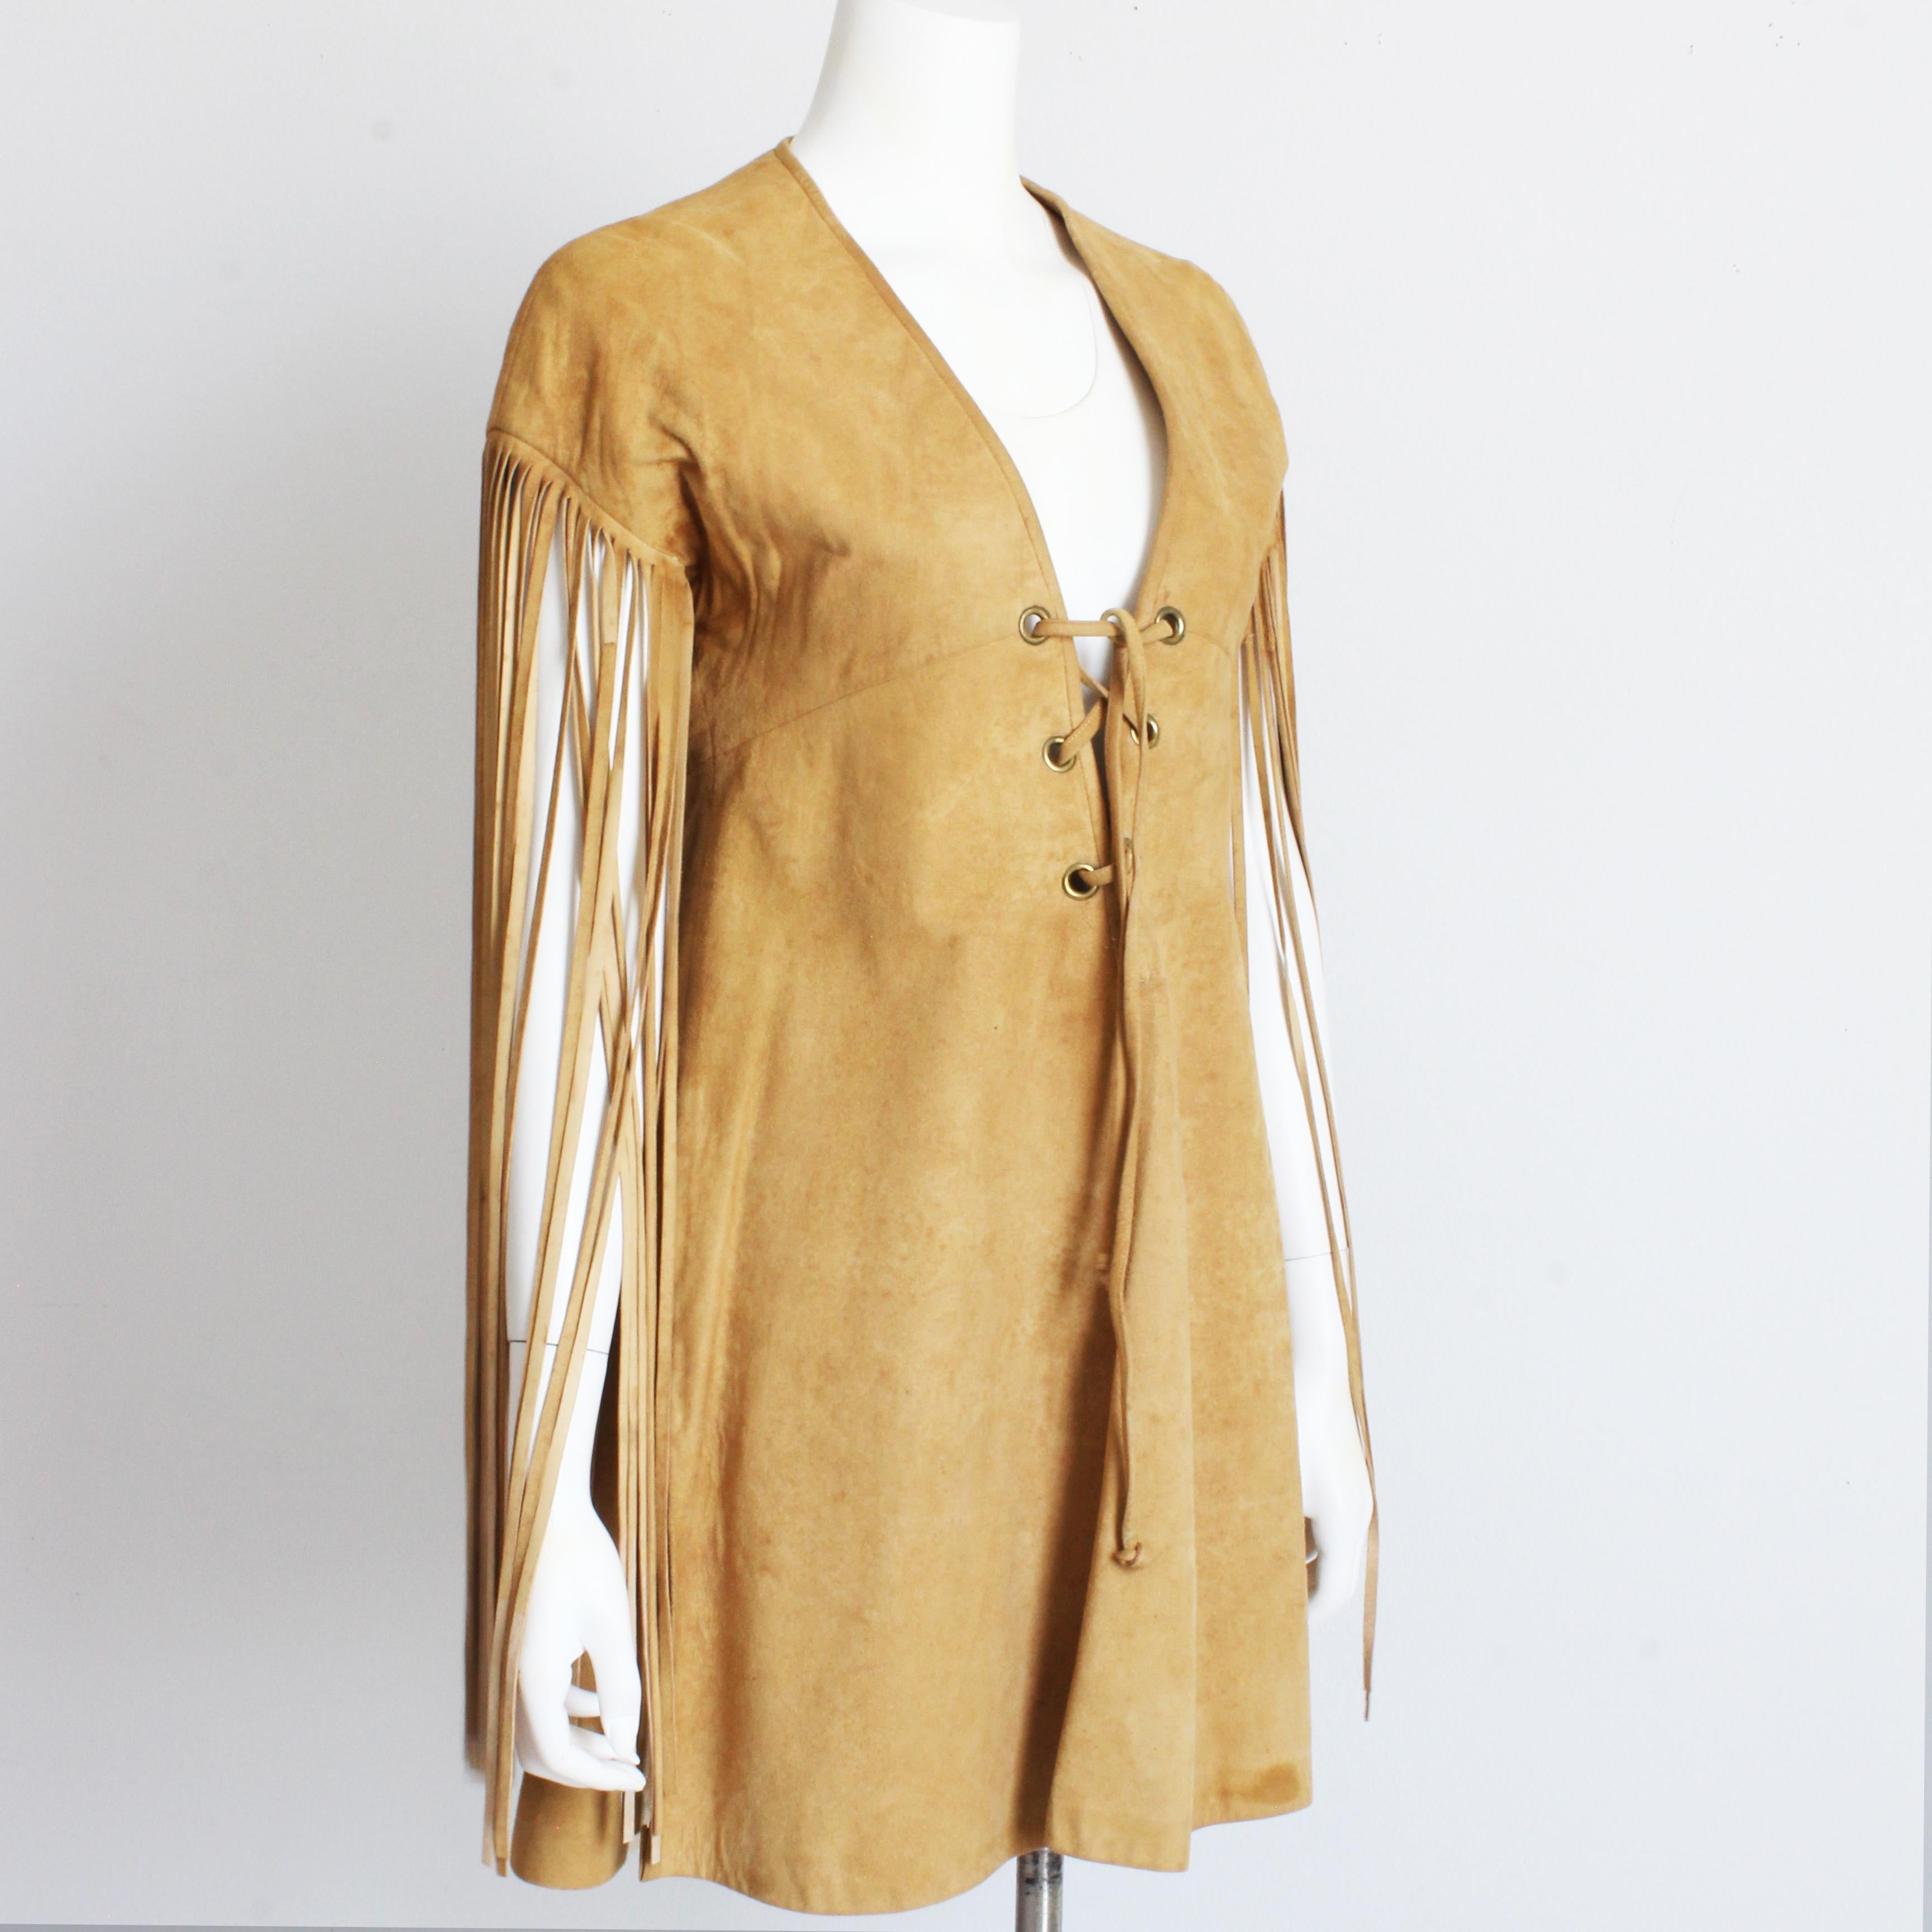 Fabulous Bonnie Cashin for Sills chamois leather tunic dress with fringe, likely made in the early 60s.  A similar design can be seen in Bonnie Cashin's fashion sketch called 